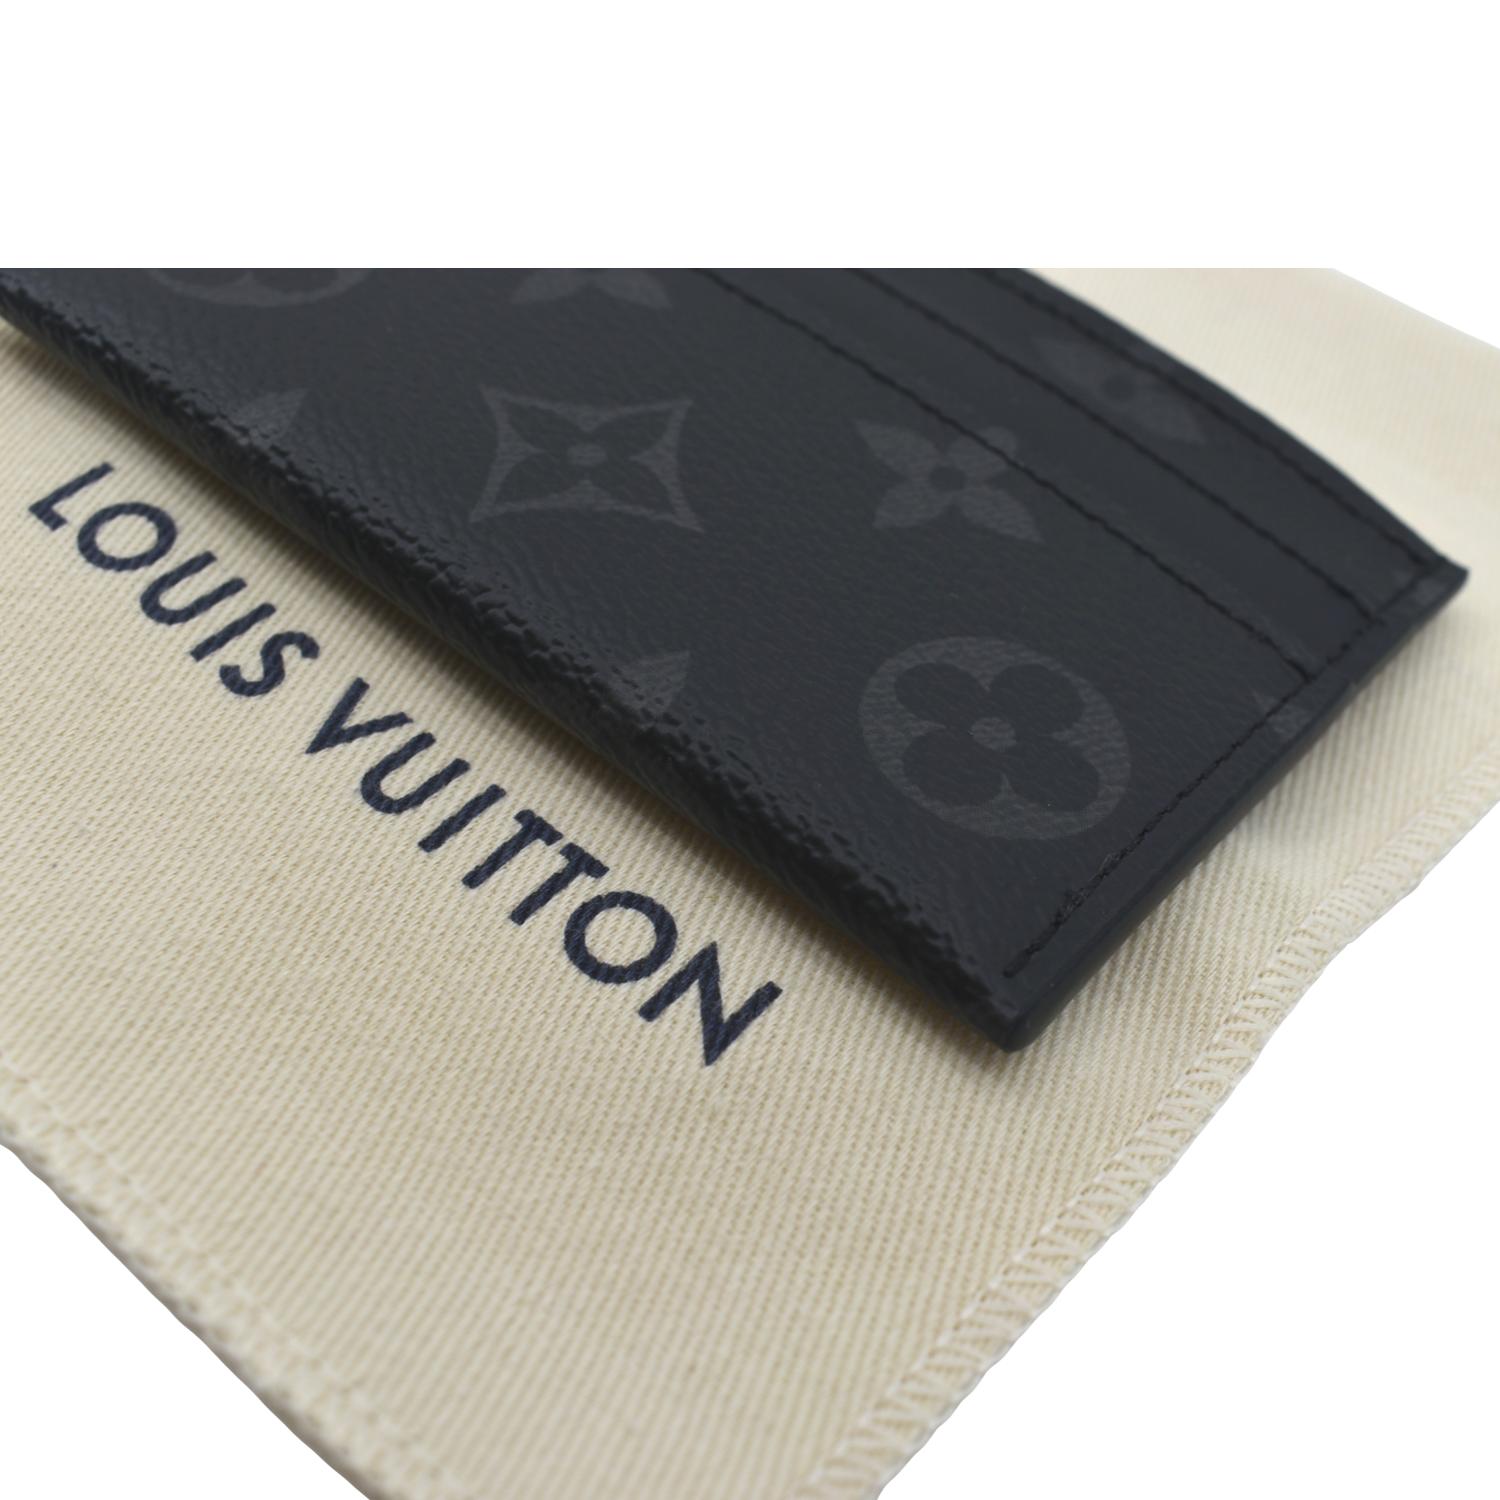 Authentic Louis Vuitton Men's Wallet W/Box and the pouch, Black with a logo